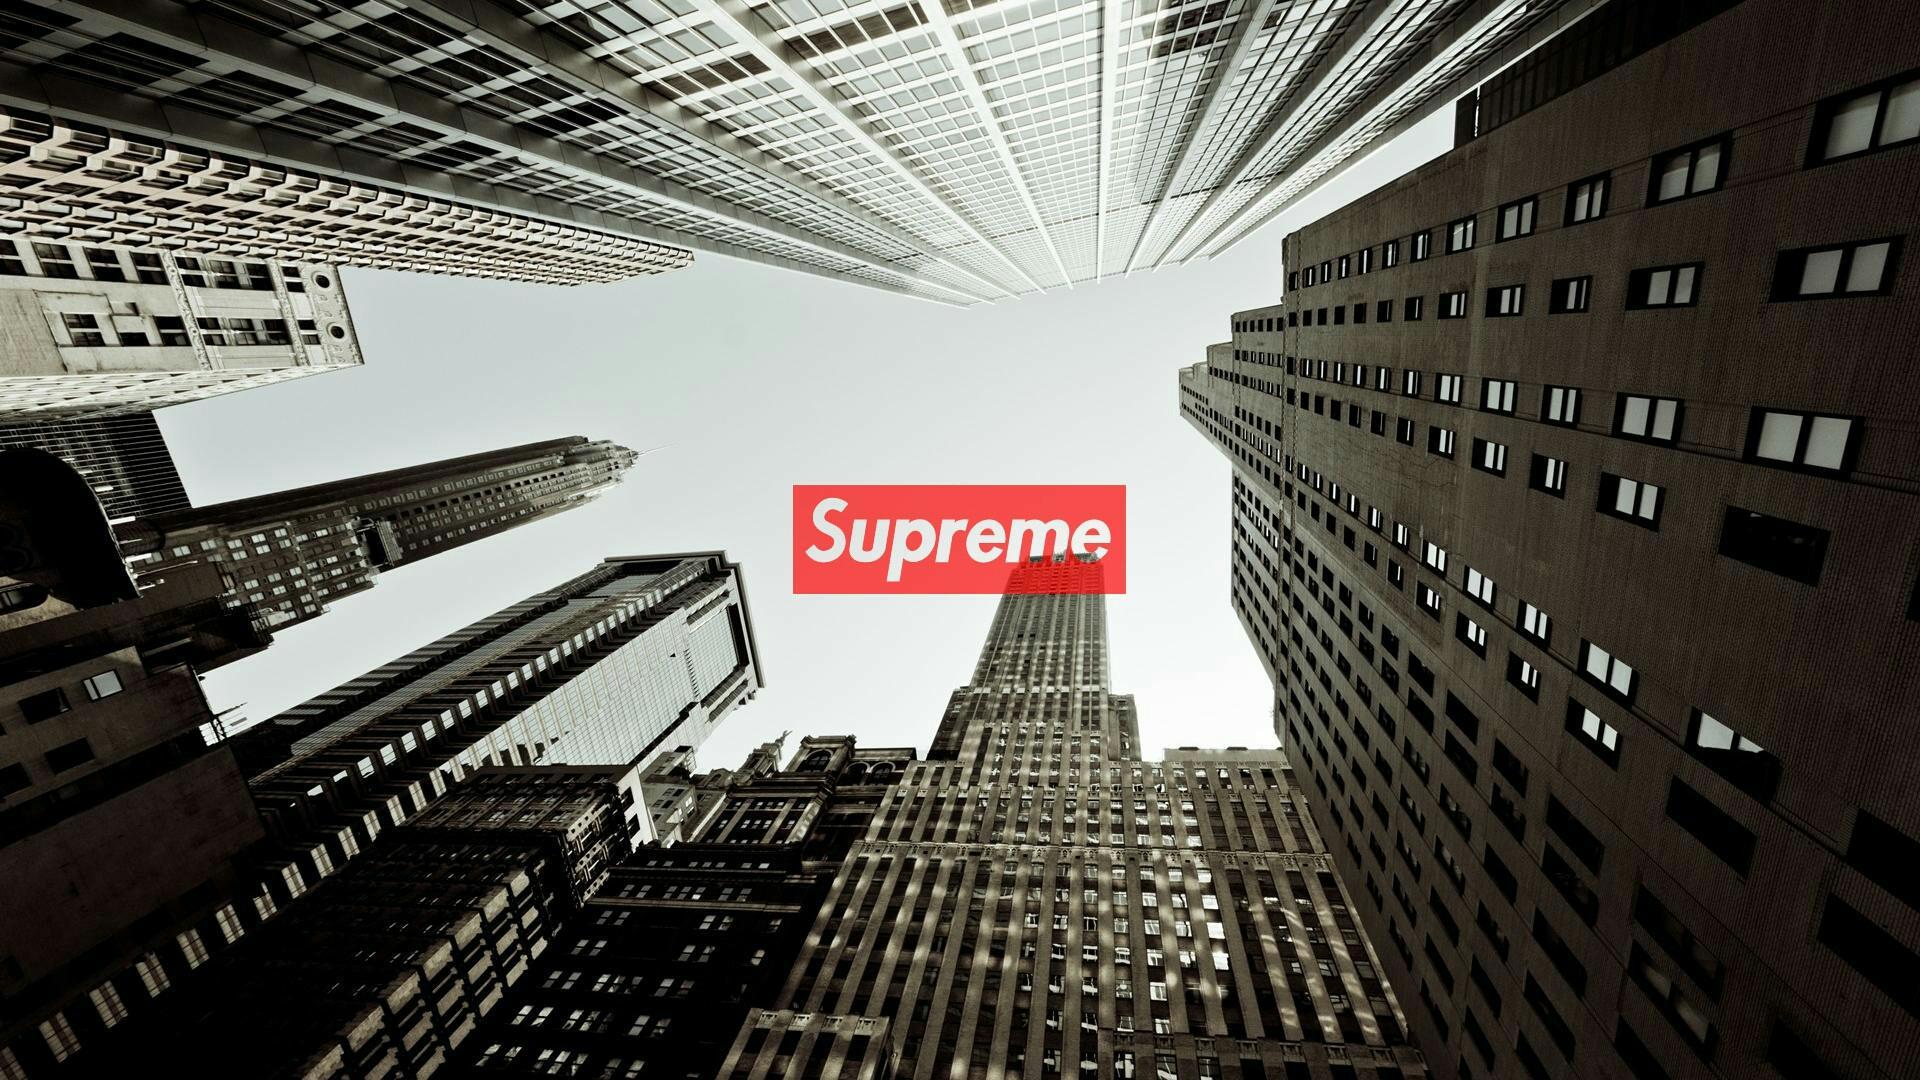 Android 用の Only Supreme Wallpapers Apk をダウンロード